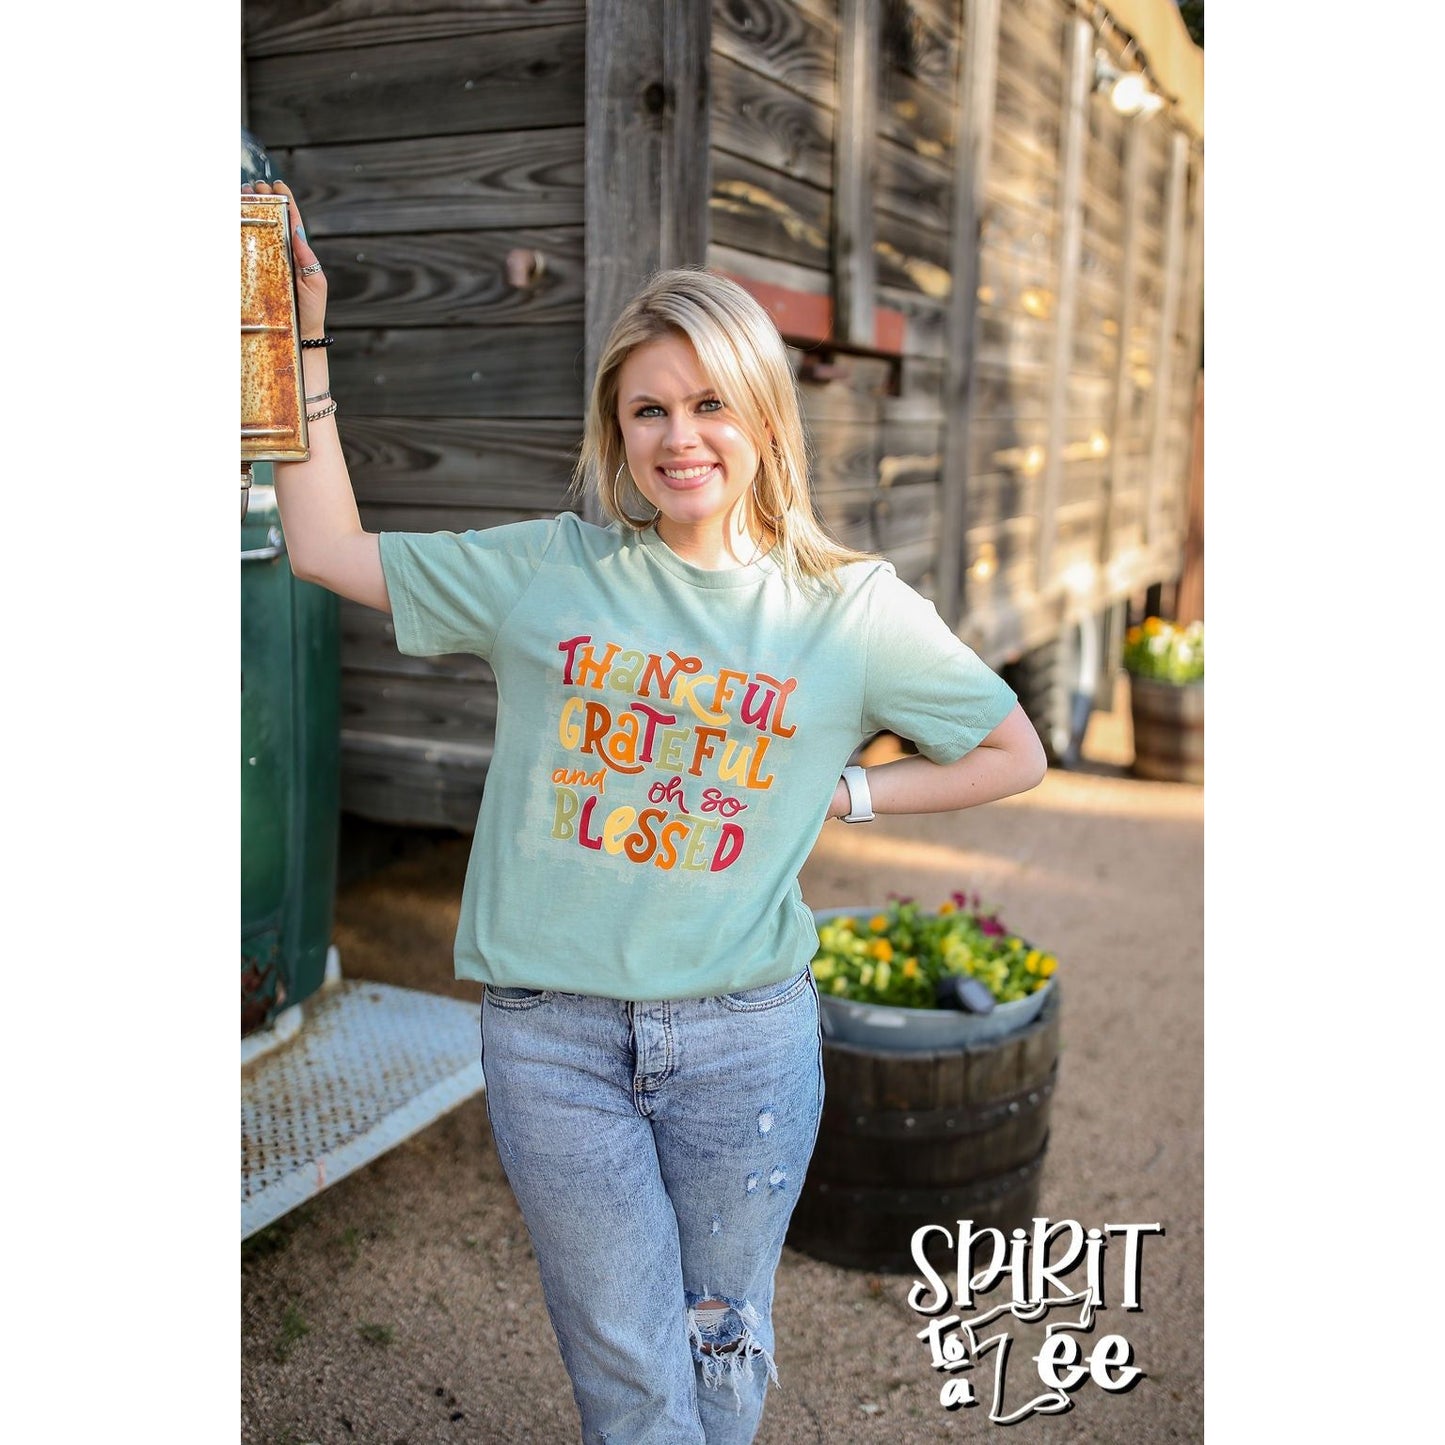 Thankful Grateful & oh so Blessed - Thanksgiving Tee